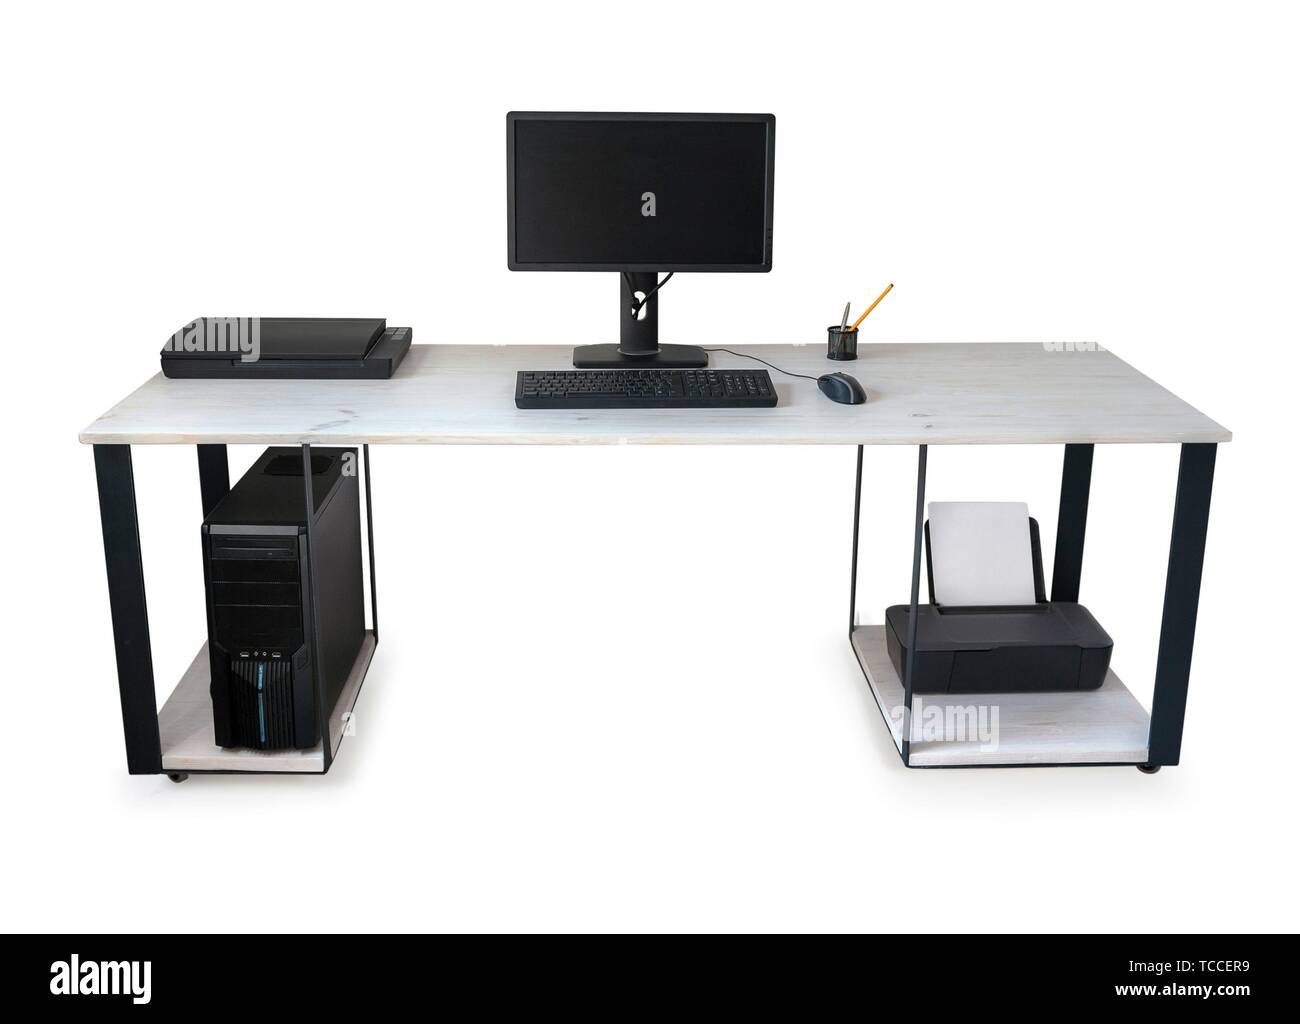 Desktop personal computer (PC) with monitor, keyboard, mouse, and printer on the wood table (desk), isolated on white Stock Photo - Alamy